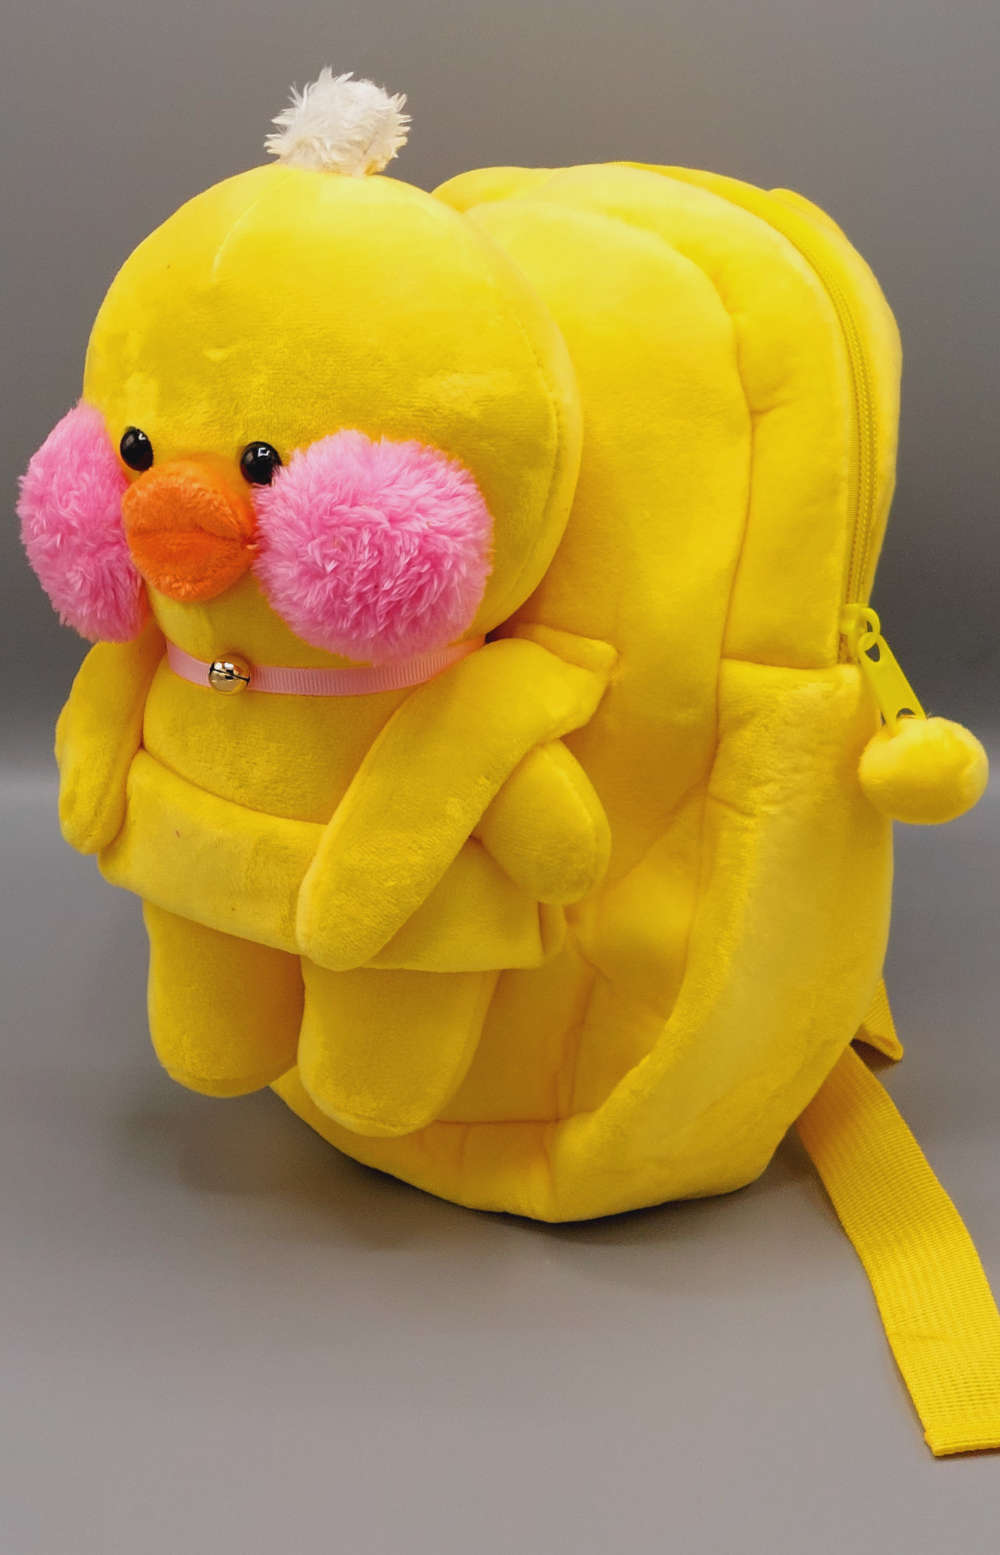 Duck Plush Stuffed Toy Backpack With Detachable Toy For Kids | Cute Mini Duck Cartoon Soft Toy School Bag